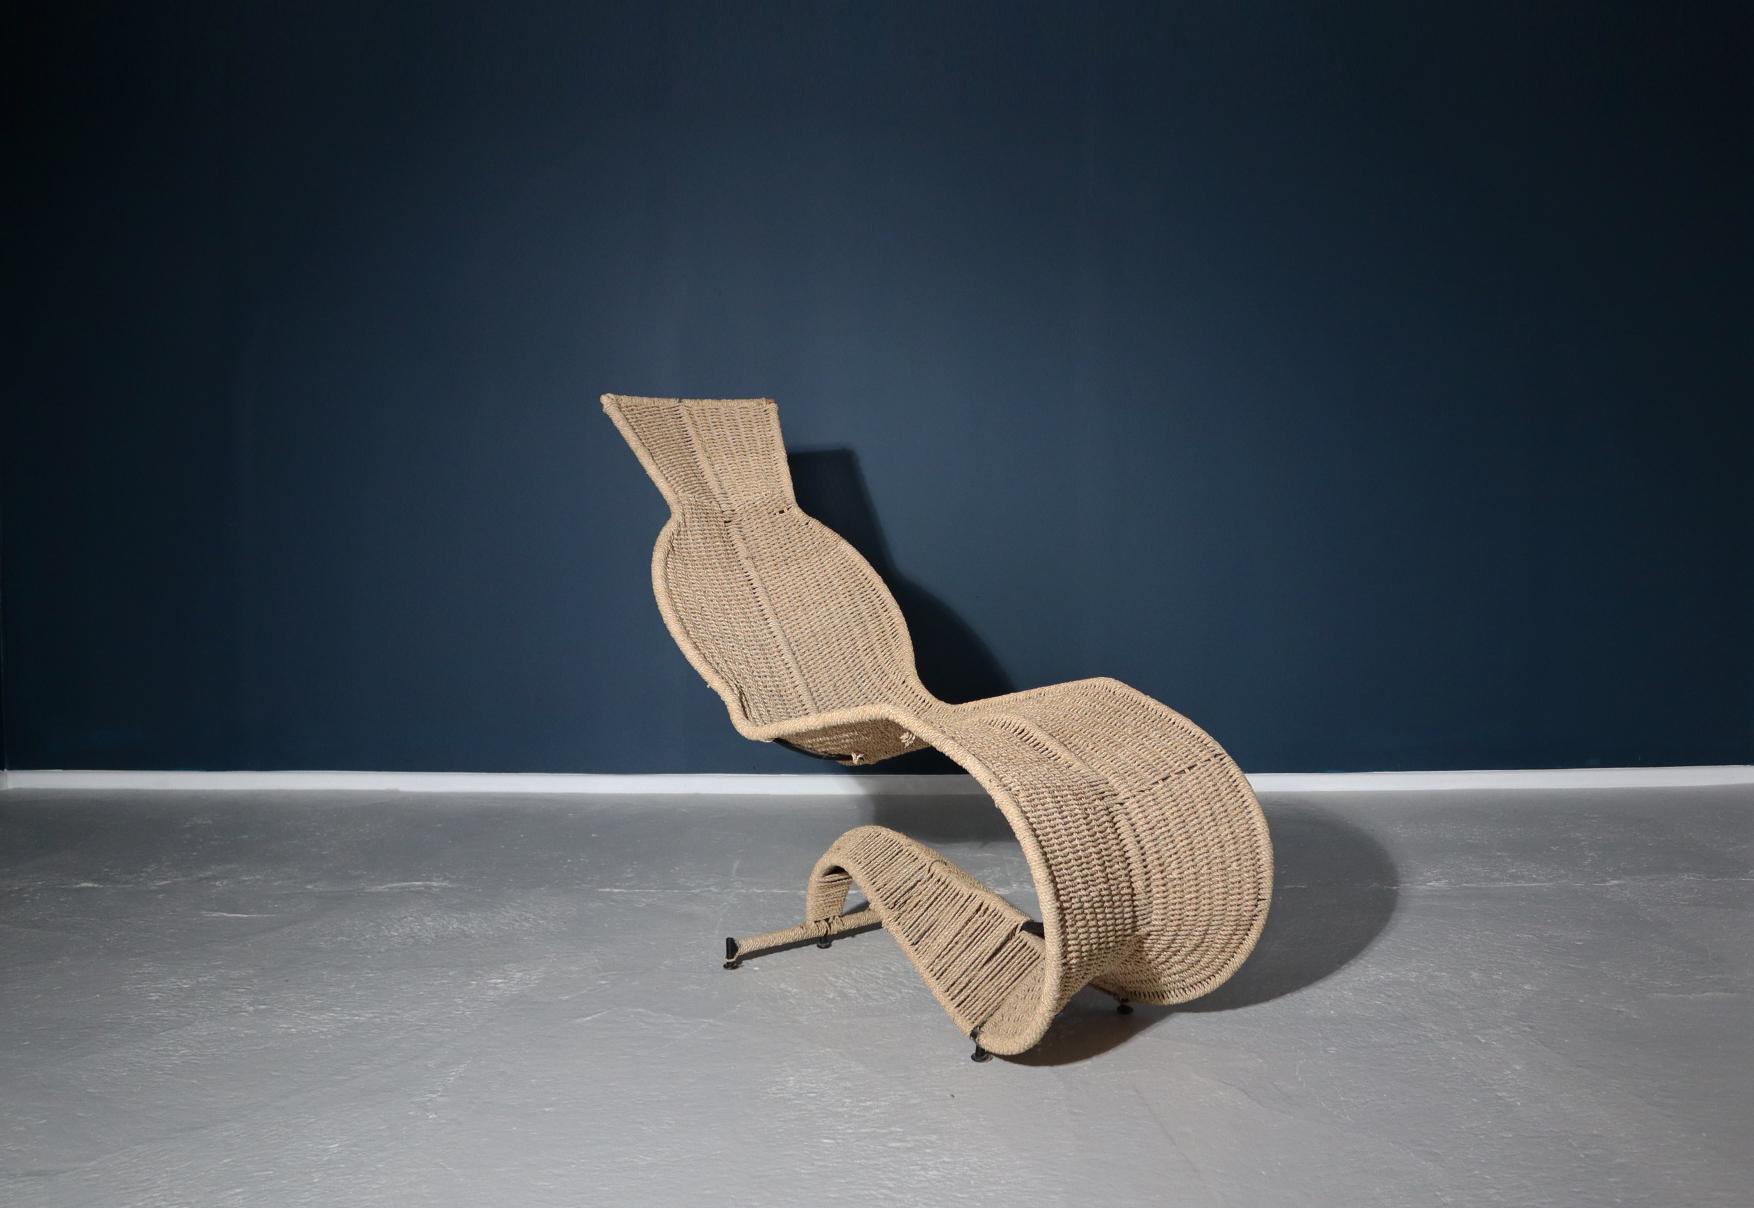 Tom Dixon 'Bolide' Woven Seagrass chair, London, 1991

The metal sculptured Bolide is a true British icon and has become super rare
making it the ultimate collectors piece.

Tom Dixon quoted the Design to be one of the most decorative
and